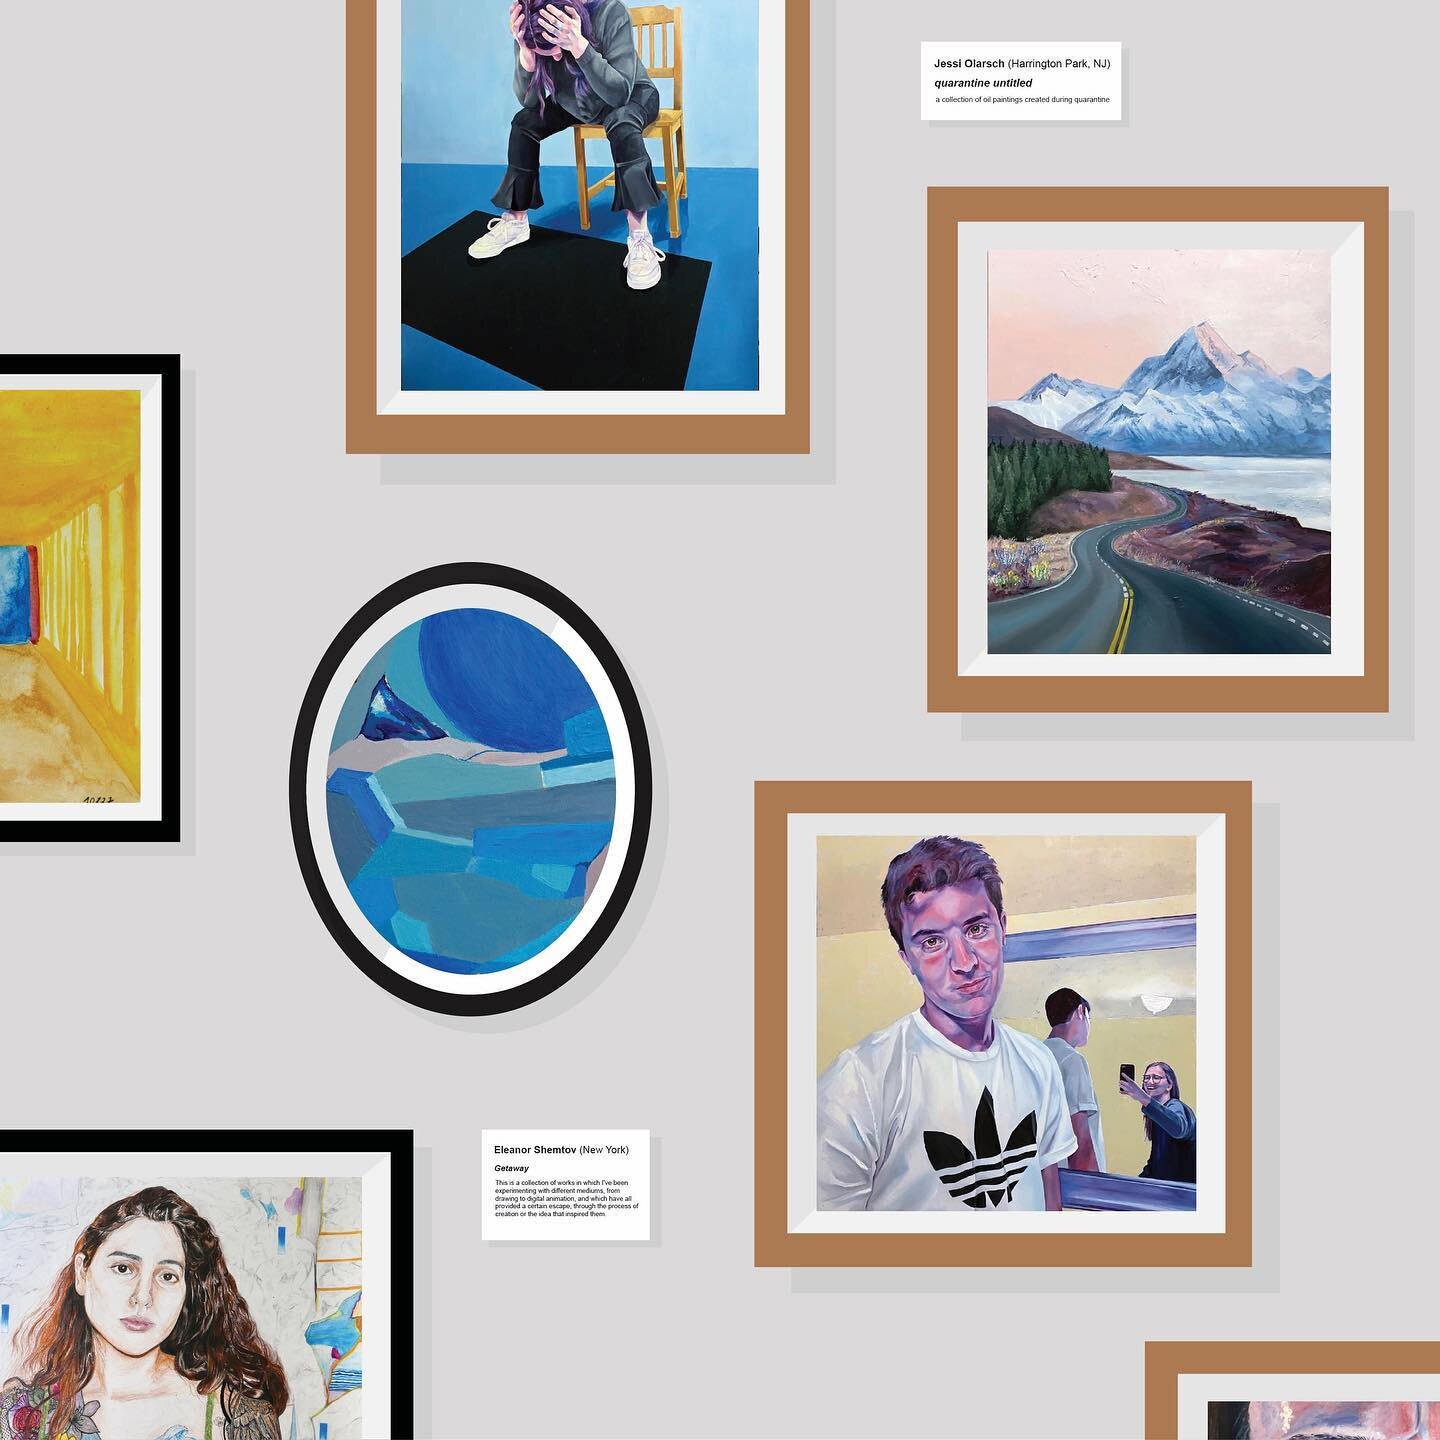 🏡Quaranthings Gallery 5 Release🏡 
swipe through to check out the creative talent of student artists @eleanors__art and @jessioart !! &bull;&bull;&bull;&bull;&bull;&bull;&bull;&bull;&bull;&bull;&bull;&bull;&bull;&bull;&bull;&bull;&bull;&bull;&bull;&